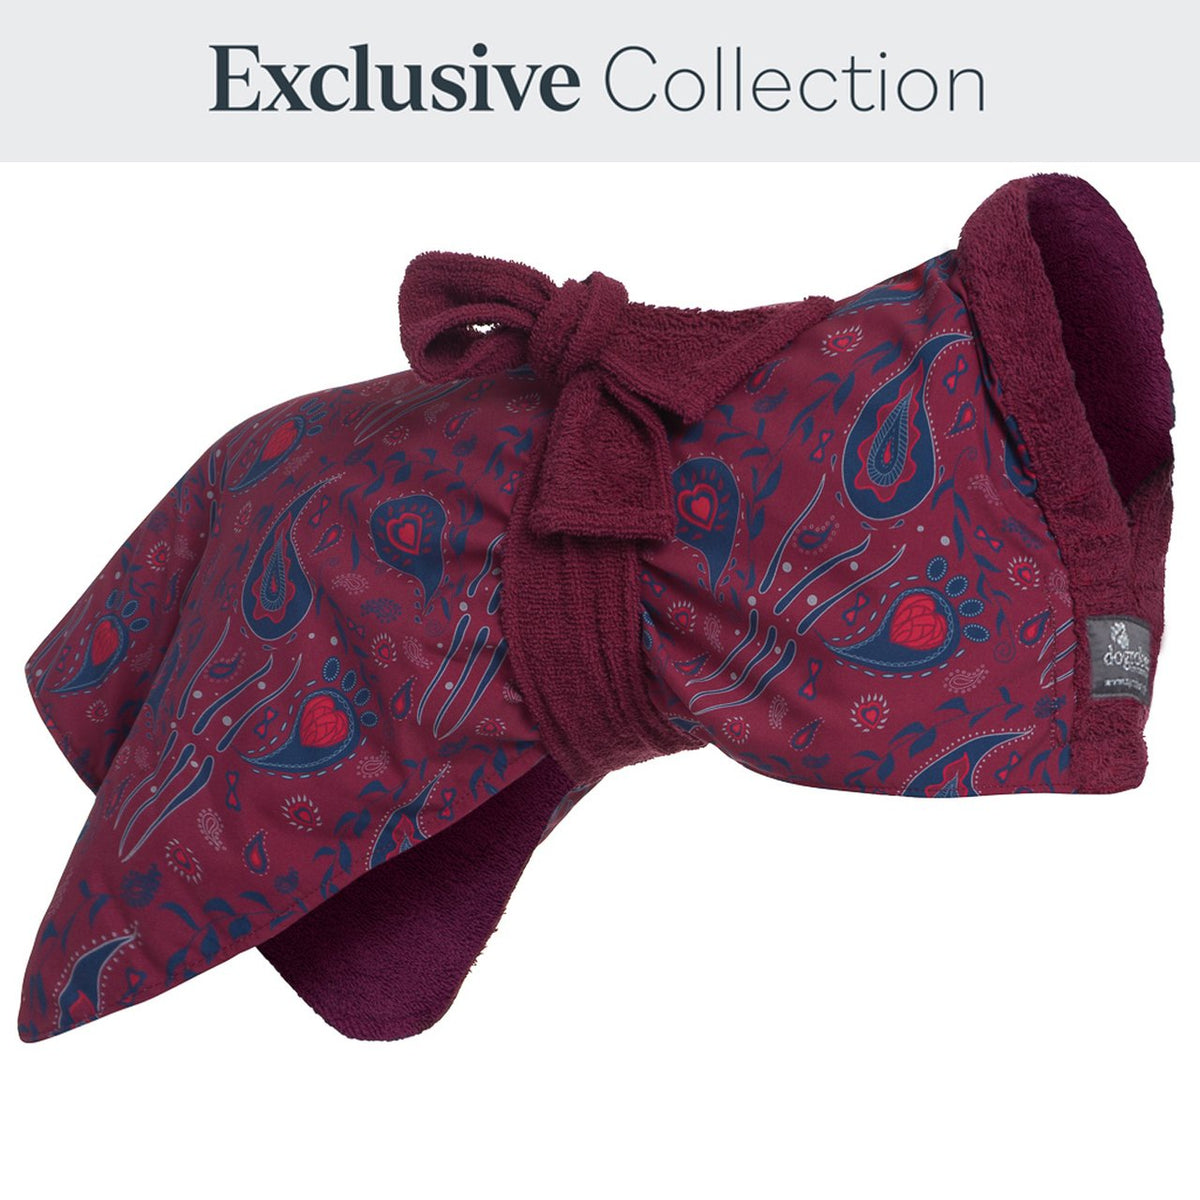 Stylish yet practical paisley drying Dogrobe is ideal for outdoor adventures, after swimming, training, working or bathing.